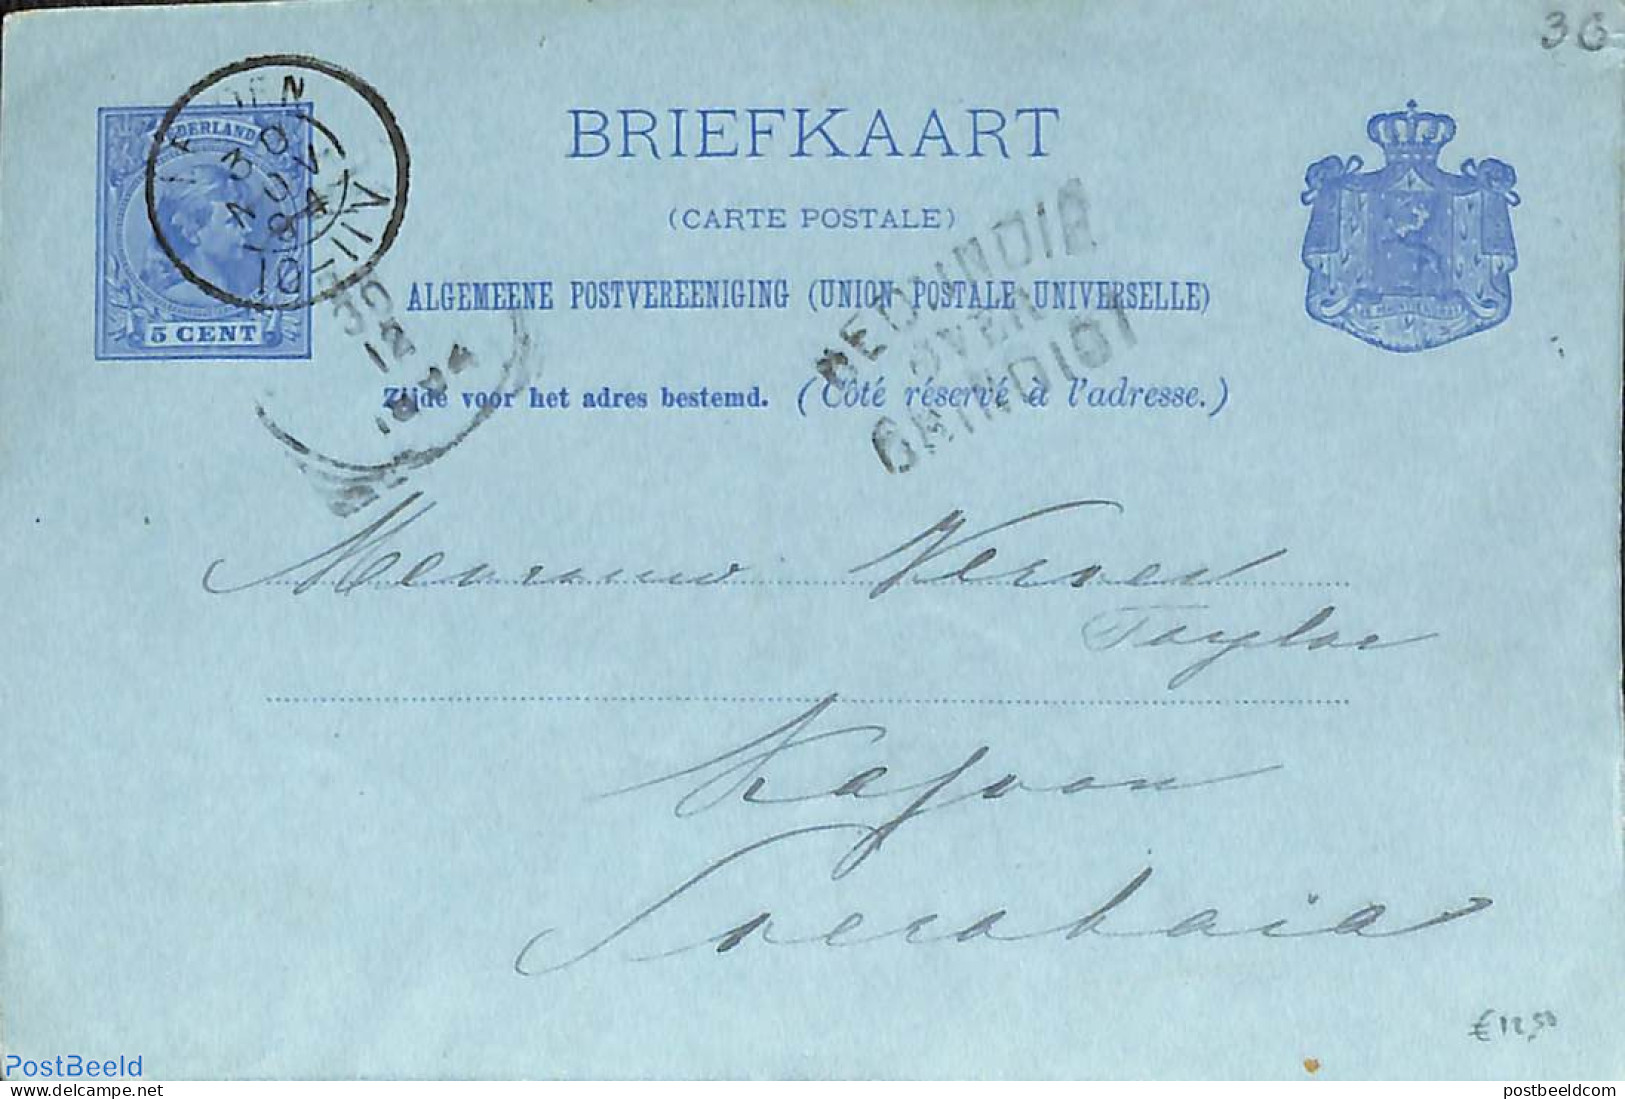 Netherlands 1894 Postcard 5c From Leiden To Neth. Indies, Postmark: NED INDIE OVER BRINDISI, Used Postal Stationary - Cartas & Documentos